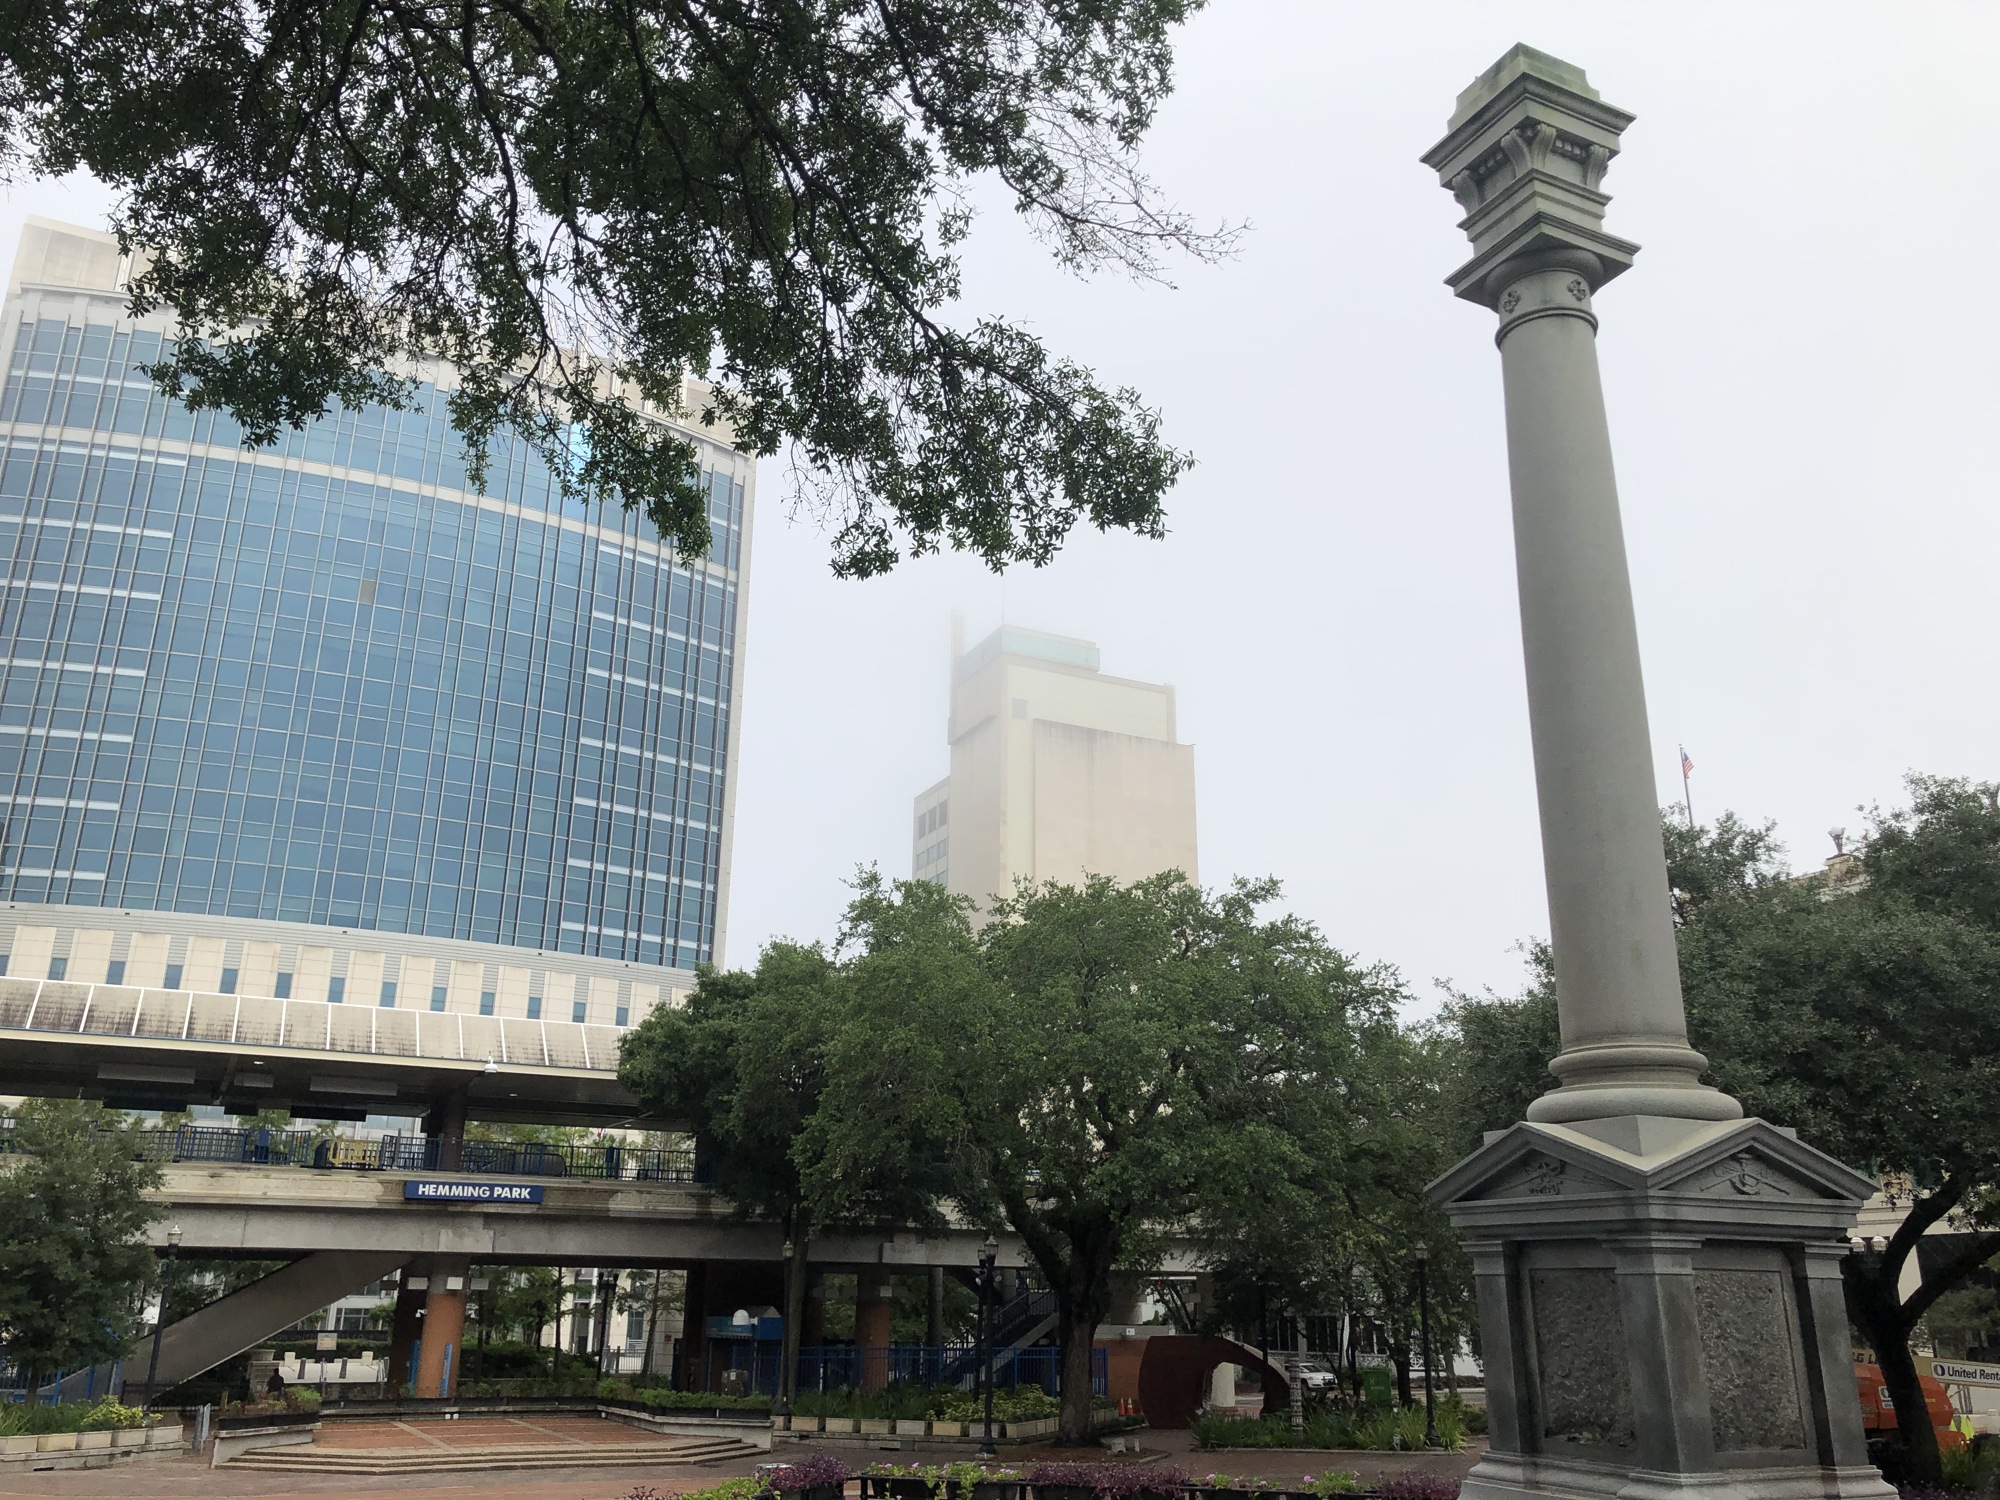 The statue of a Confederate infantryman was removed from Hemming Park on June 9.